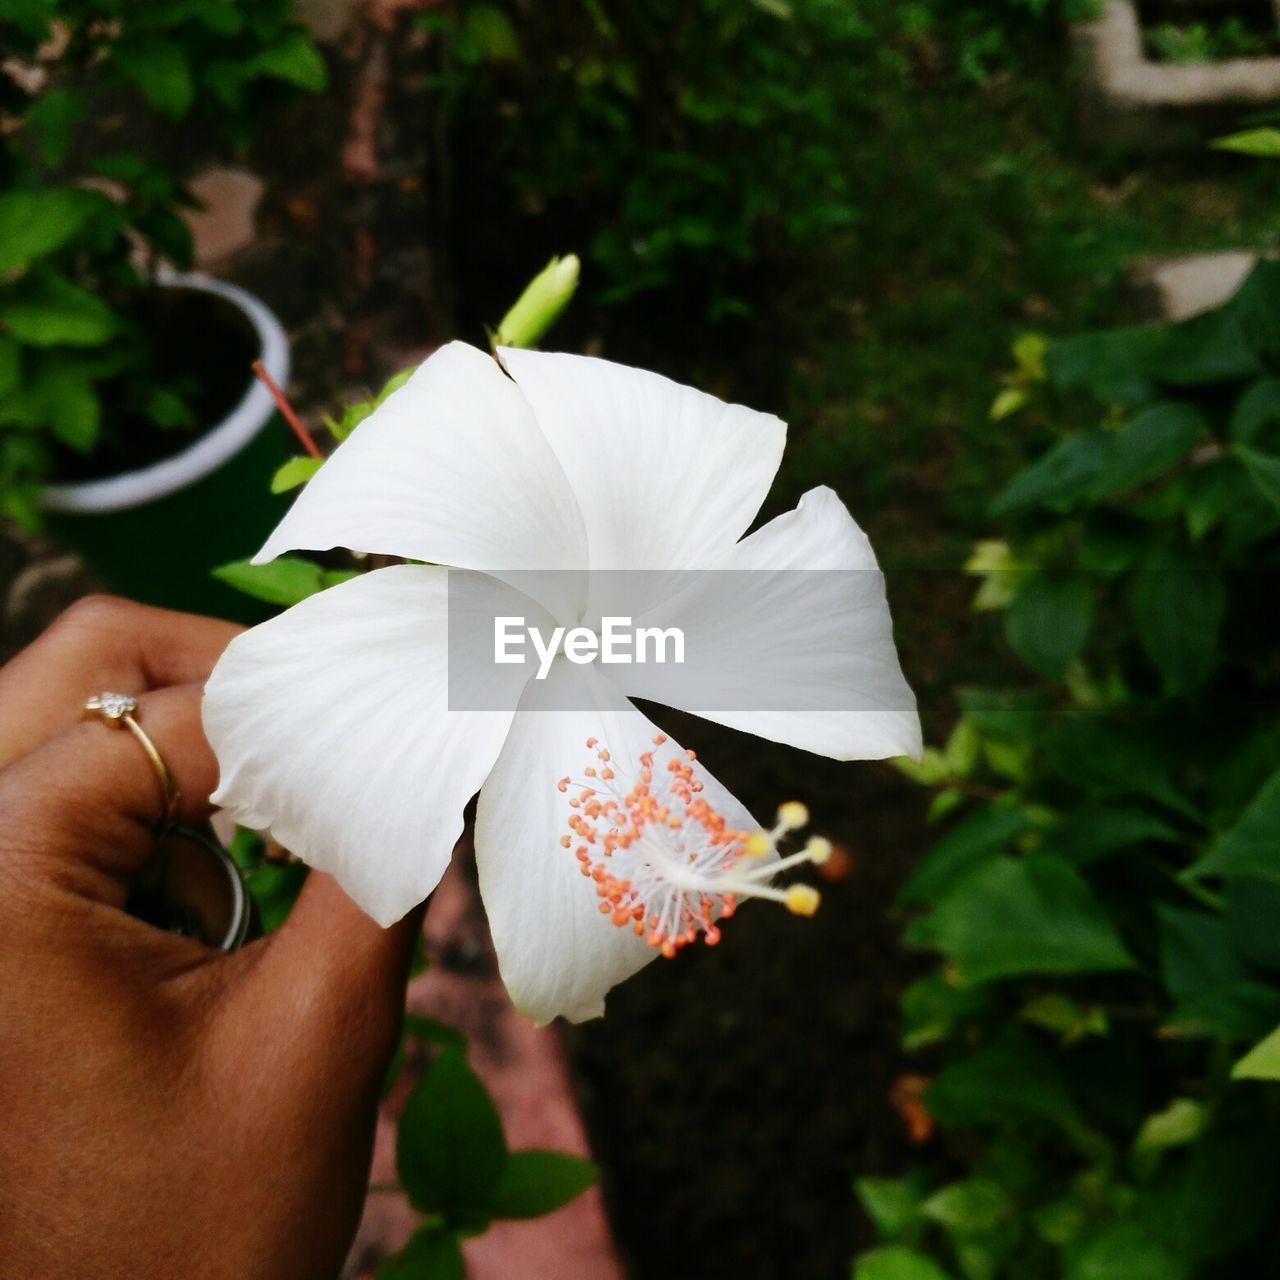 CROPPED IMAGE OF HAND HOLDING FRESH FLOWER